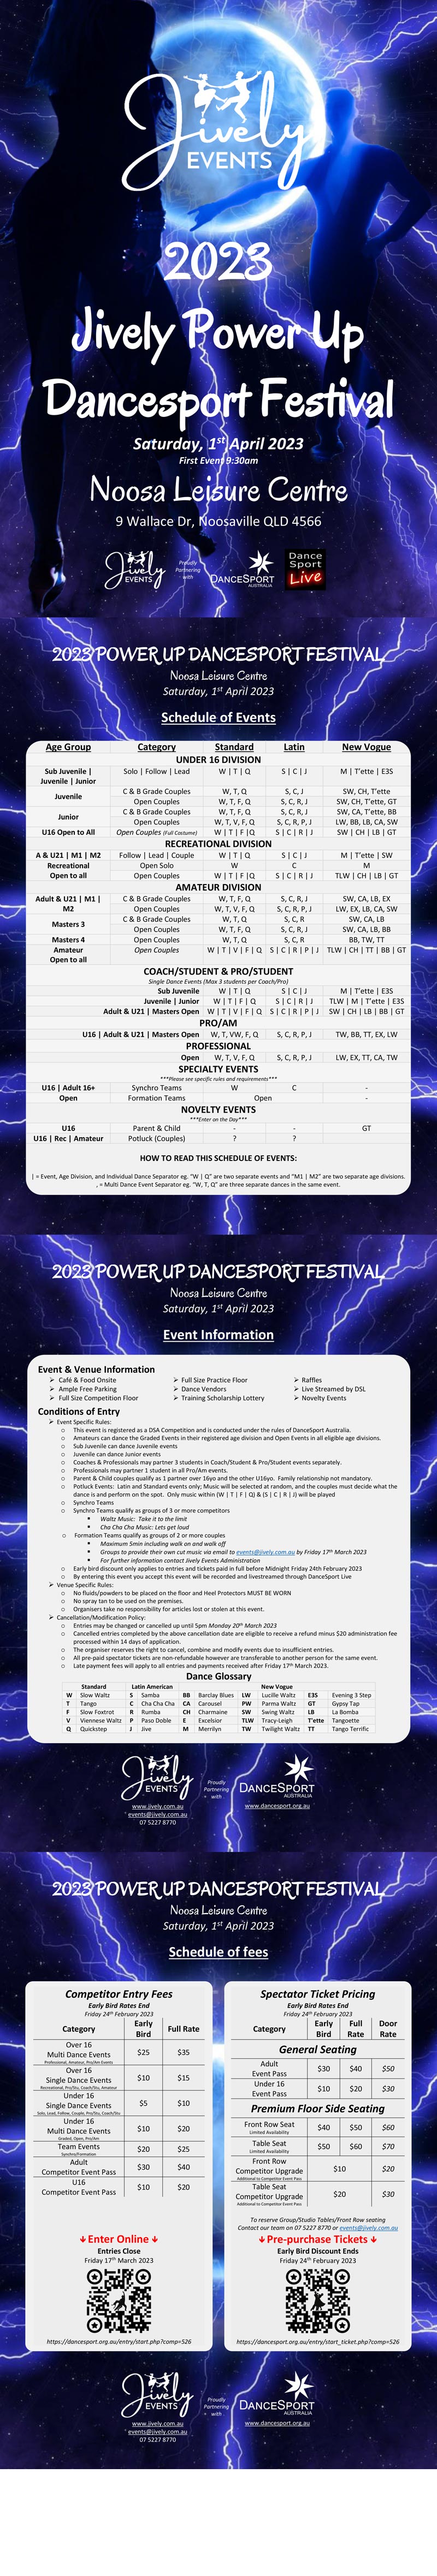 Syllabus for 2023 Jively Power Up Dancesport Festival